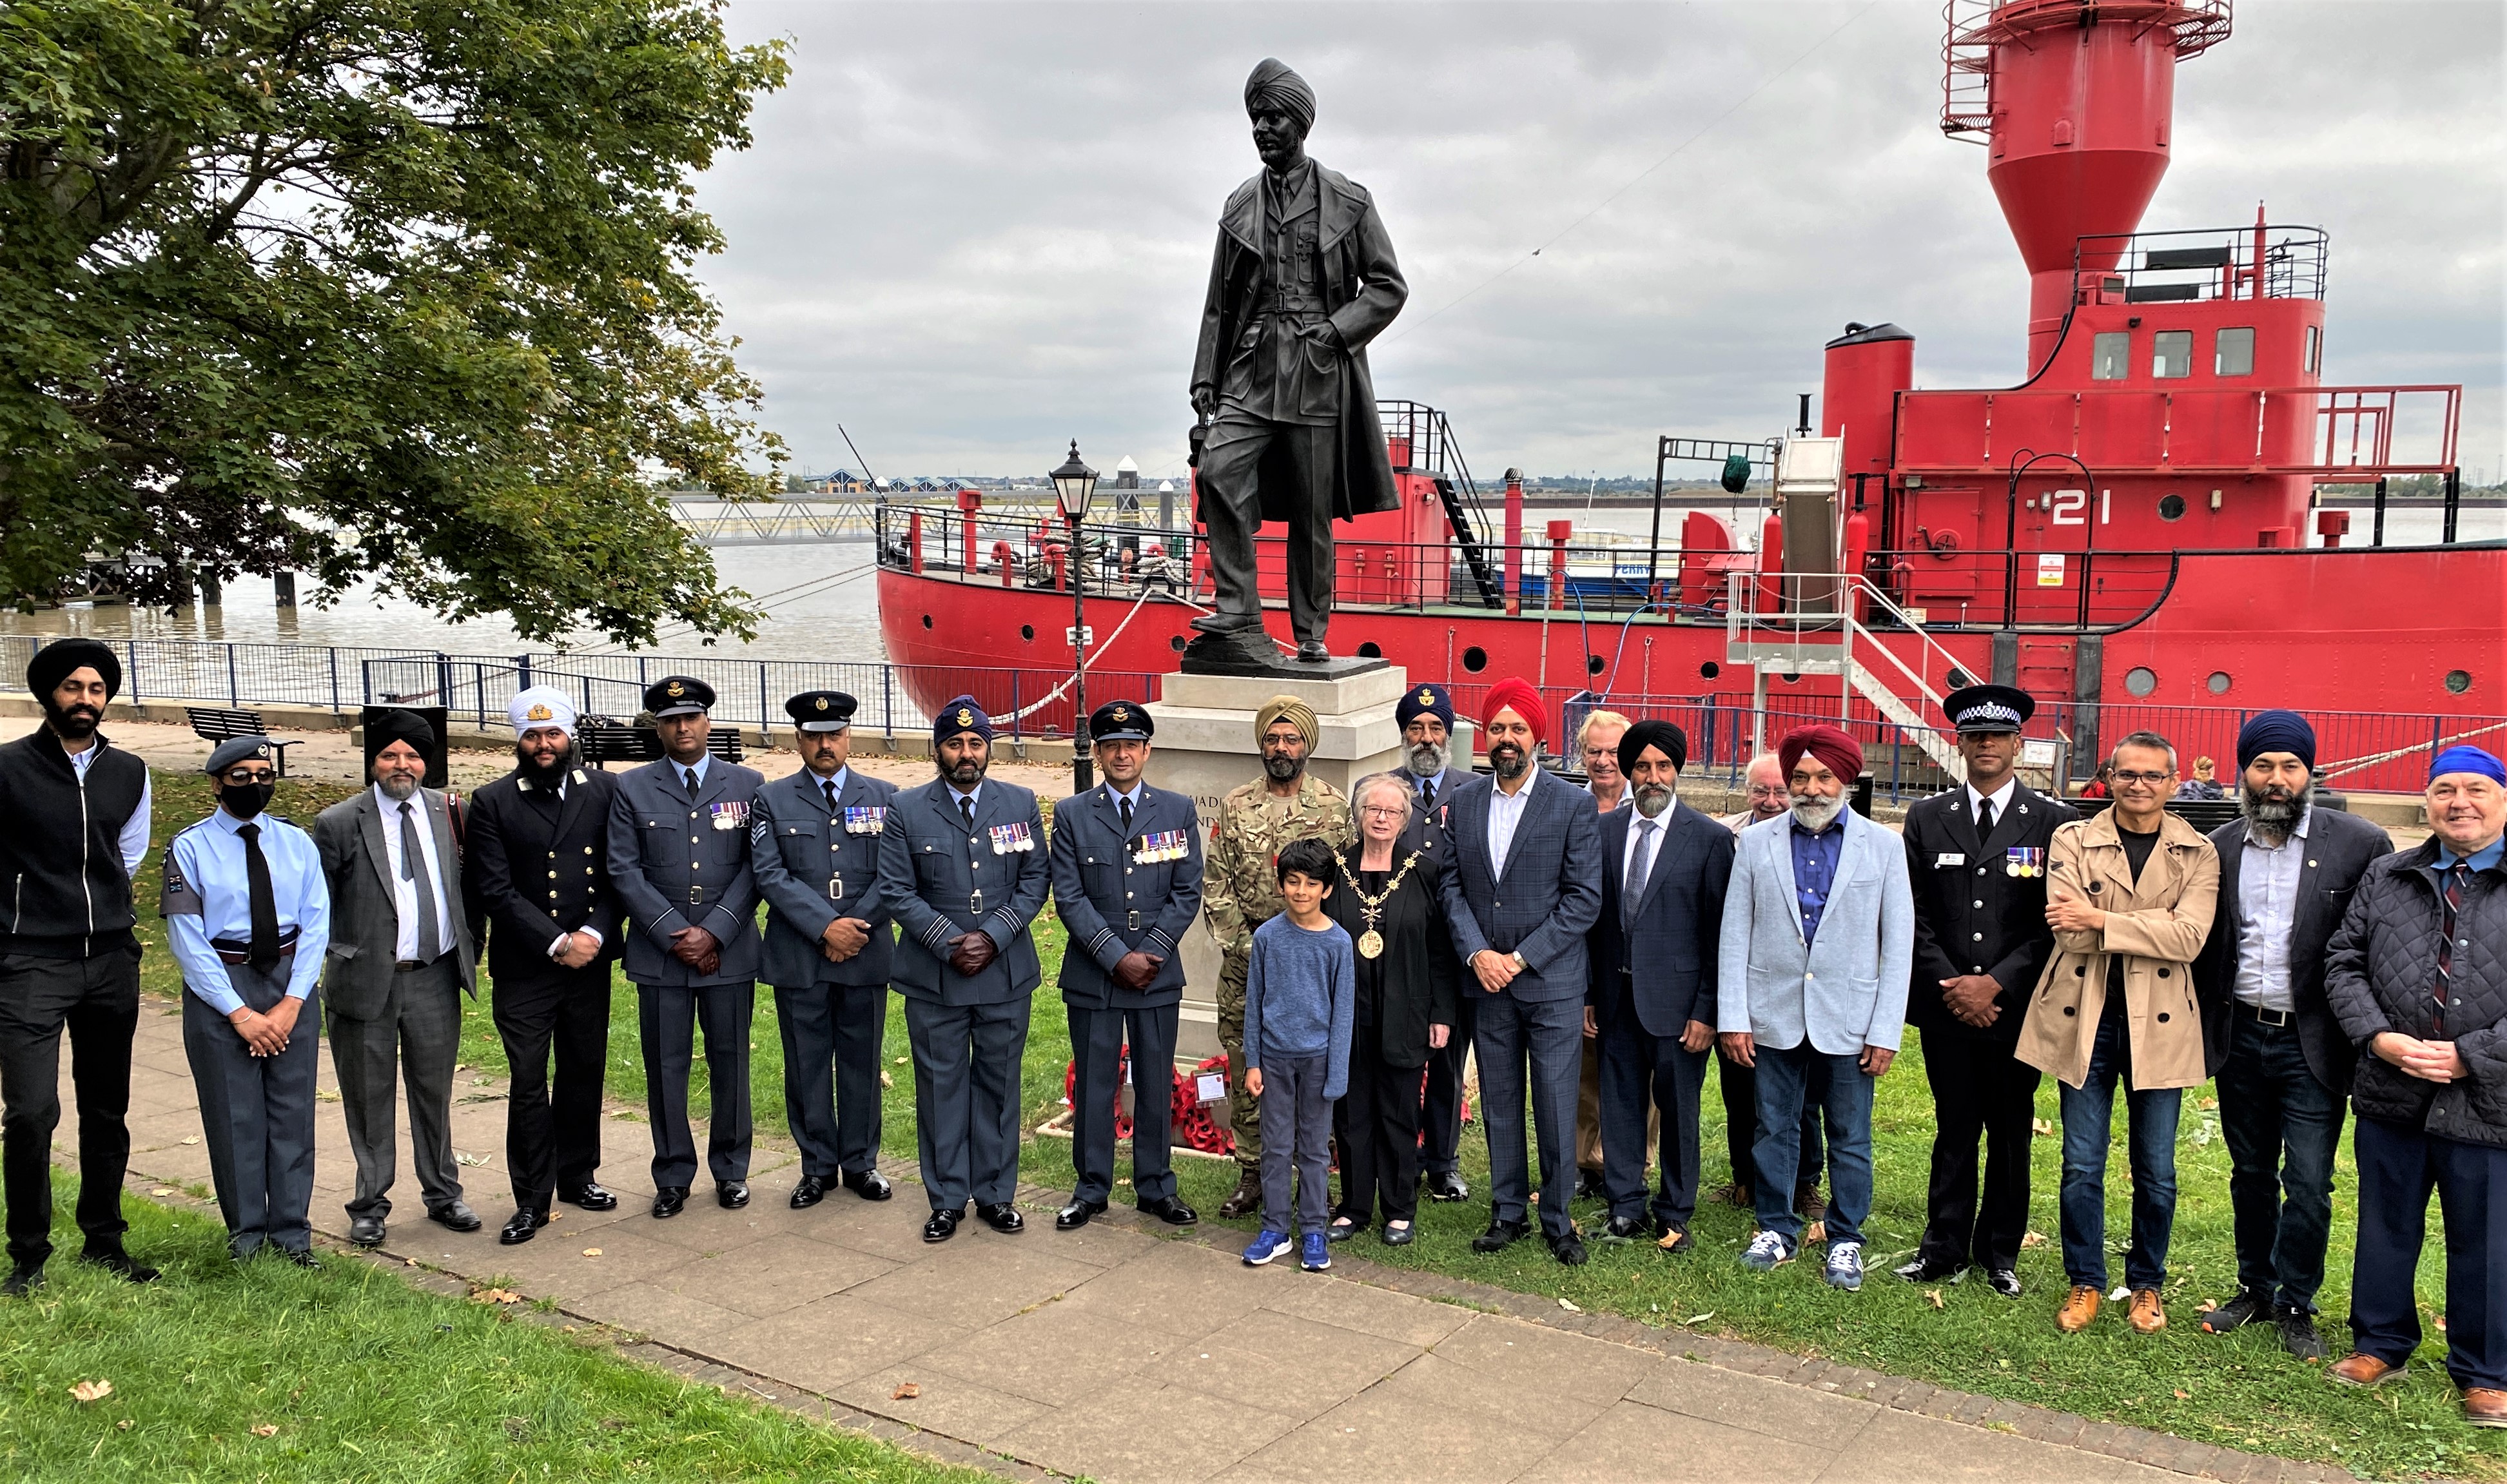 Personnel in Sikh attire stand by the statue and boat on the water.